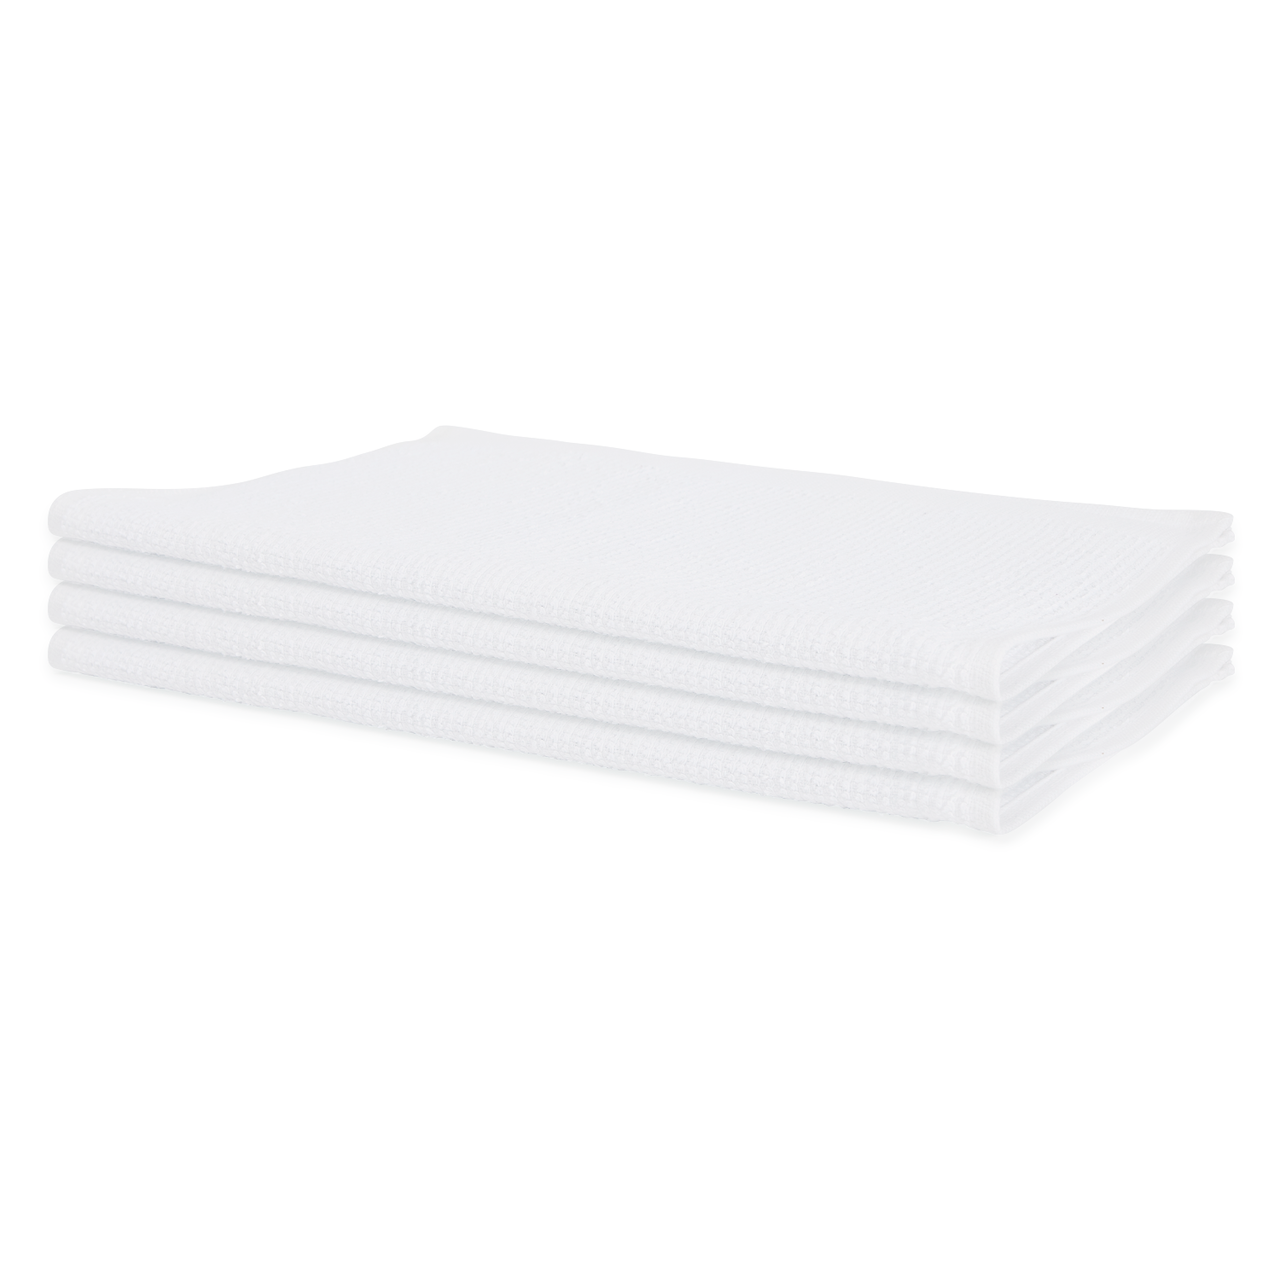 Healthcare Economy Ribbed Bar Mop, 15x18-White by HR Cotton